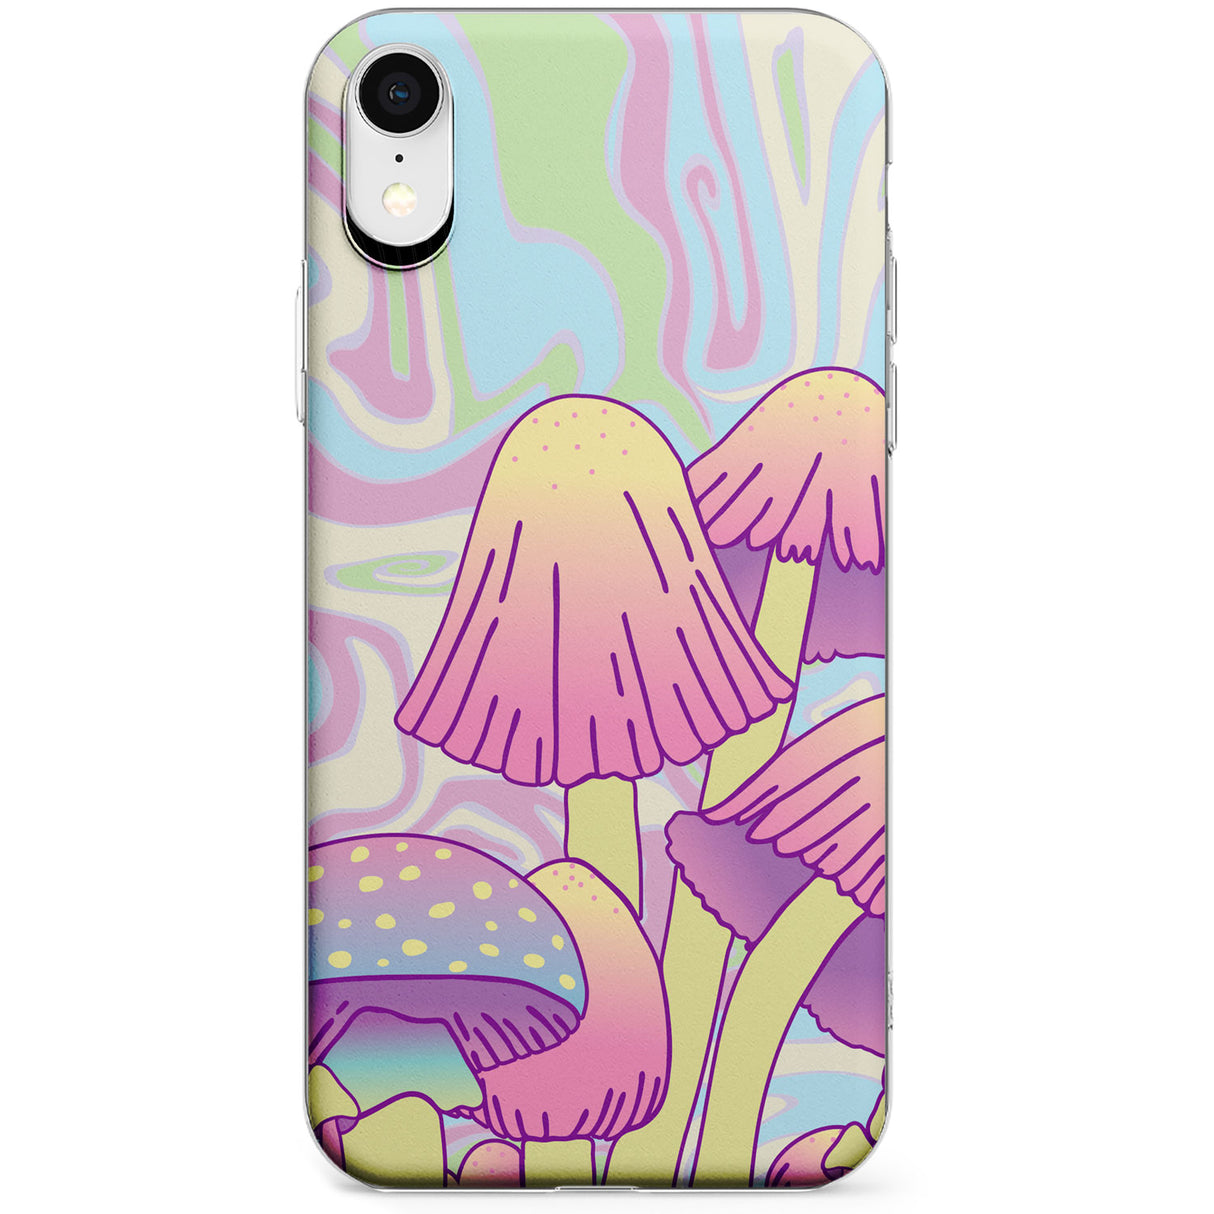 Shroomin' Phone Case for iPhone X, XS Max, XR